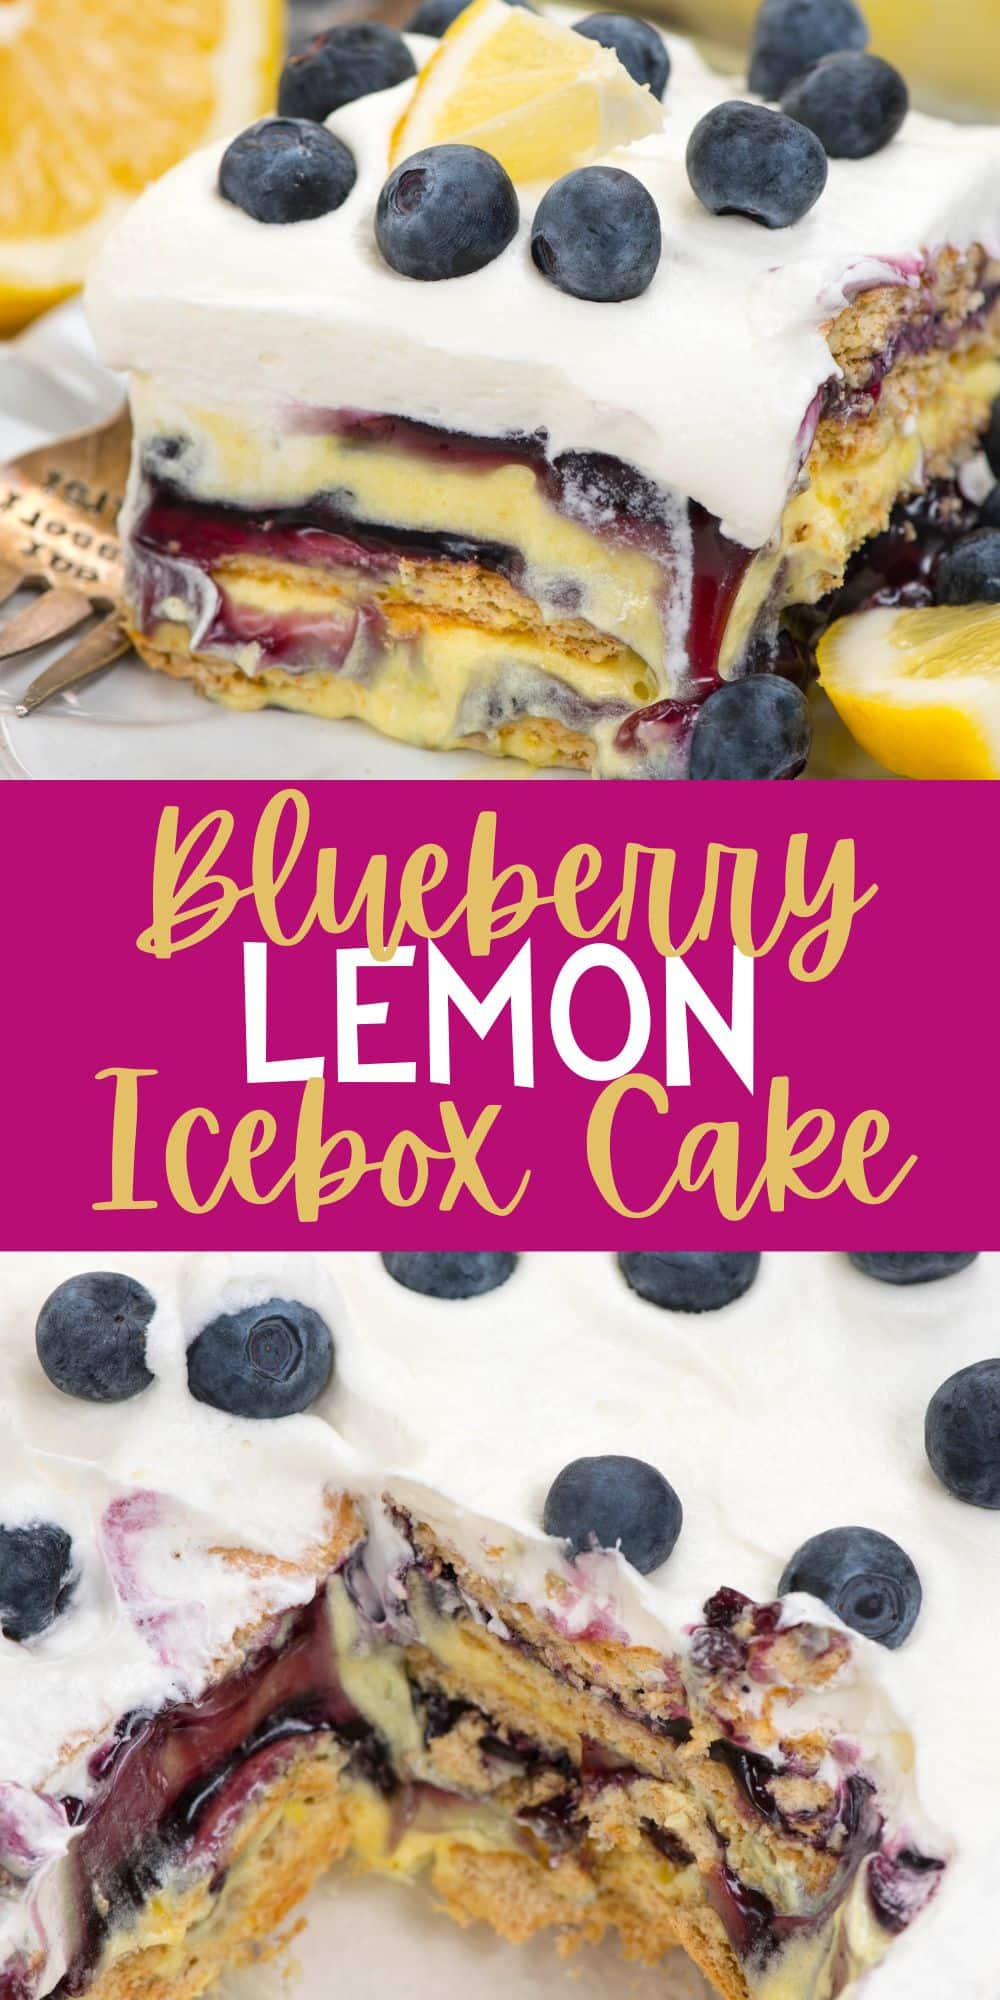 two photos of square slice of cake with blueberries and lemons on top with words on the image.